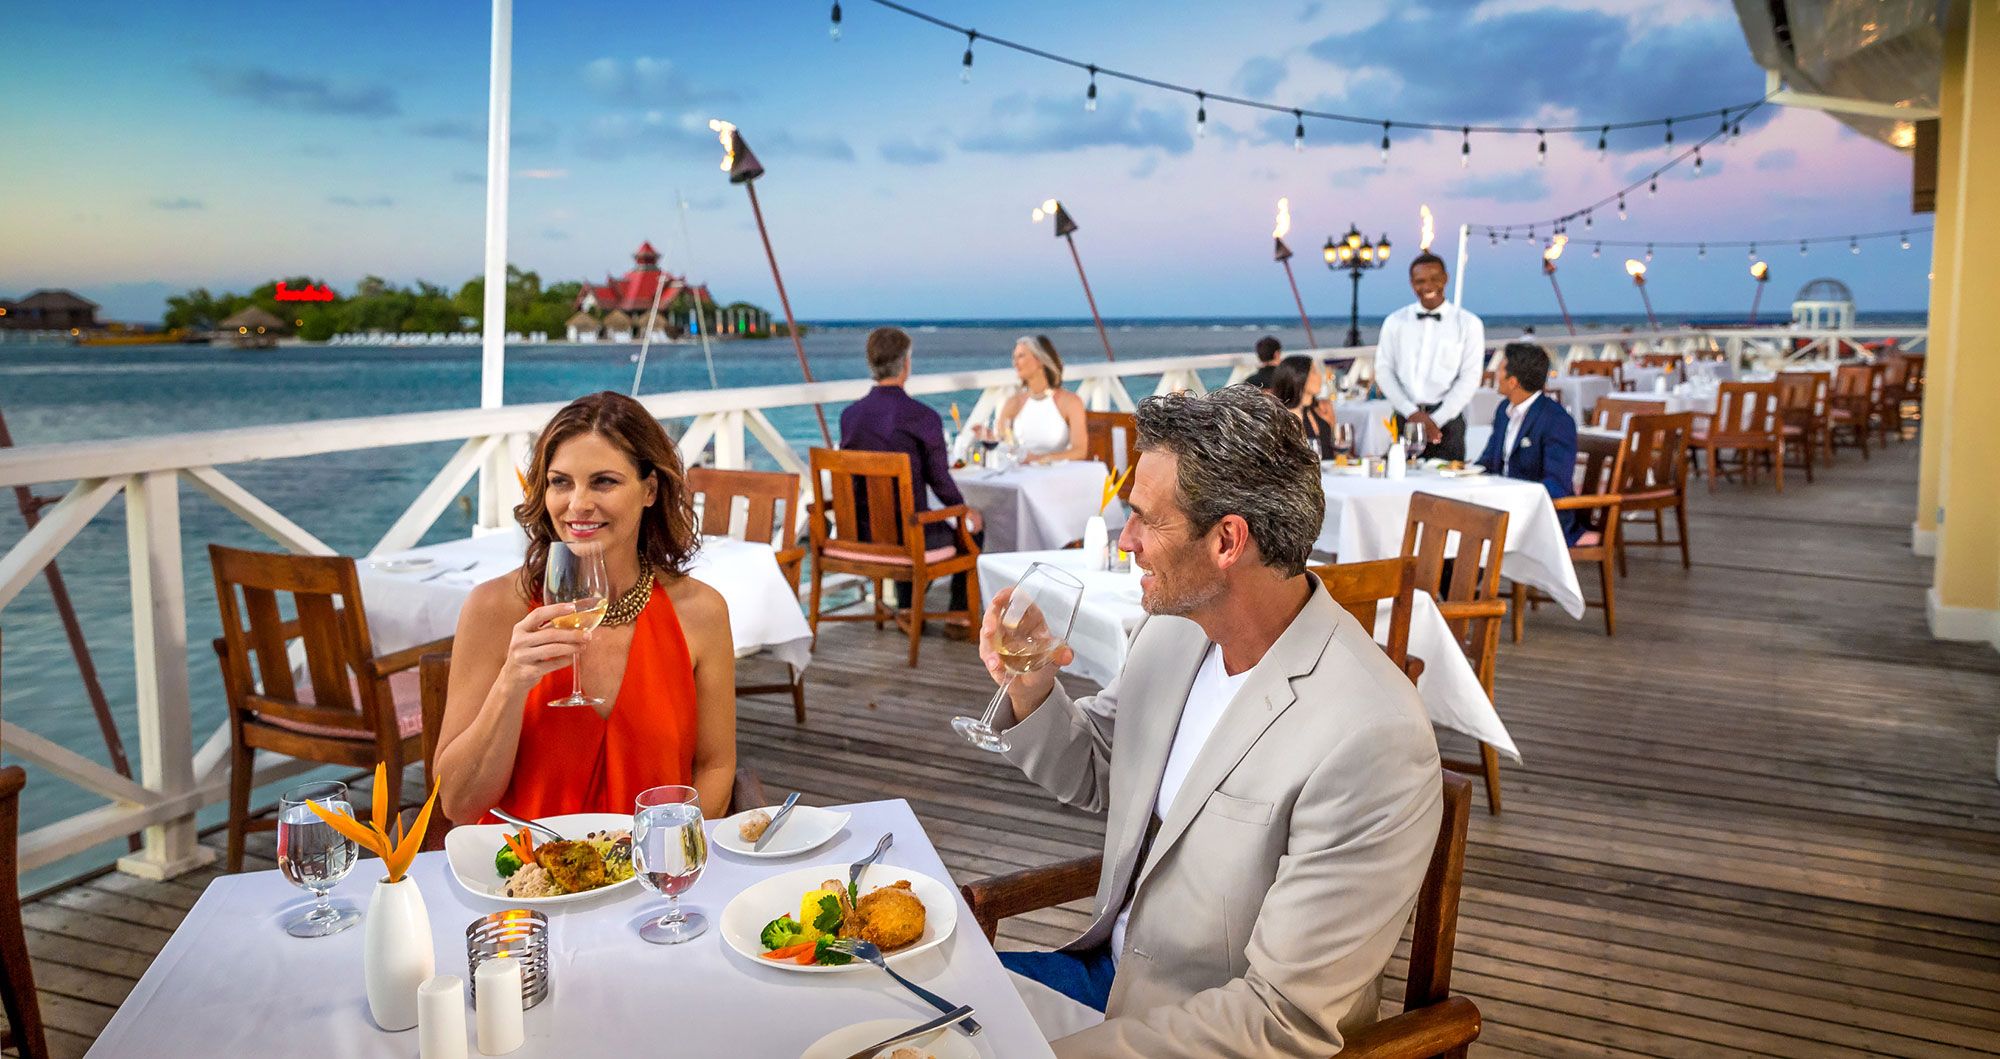 Sandals Royal Caribbean Opens Two New Restaurant Concepts | Travel Agent  Central